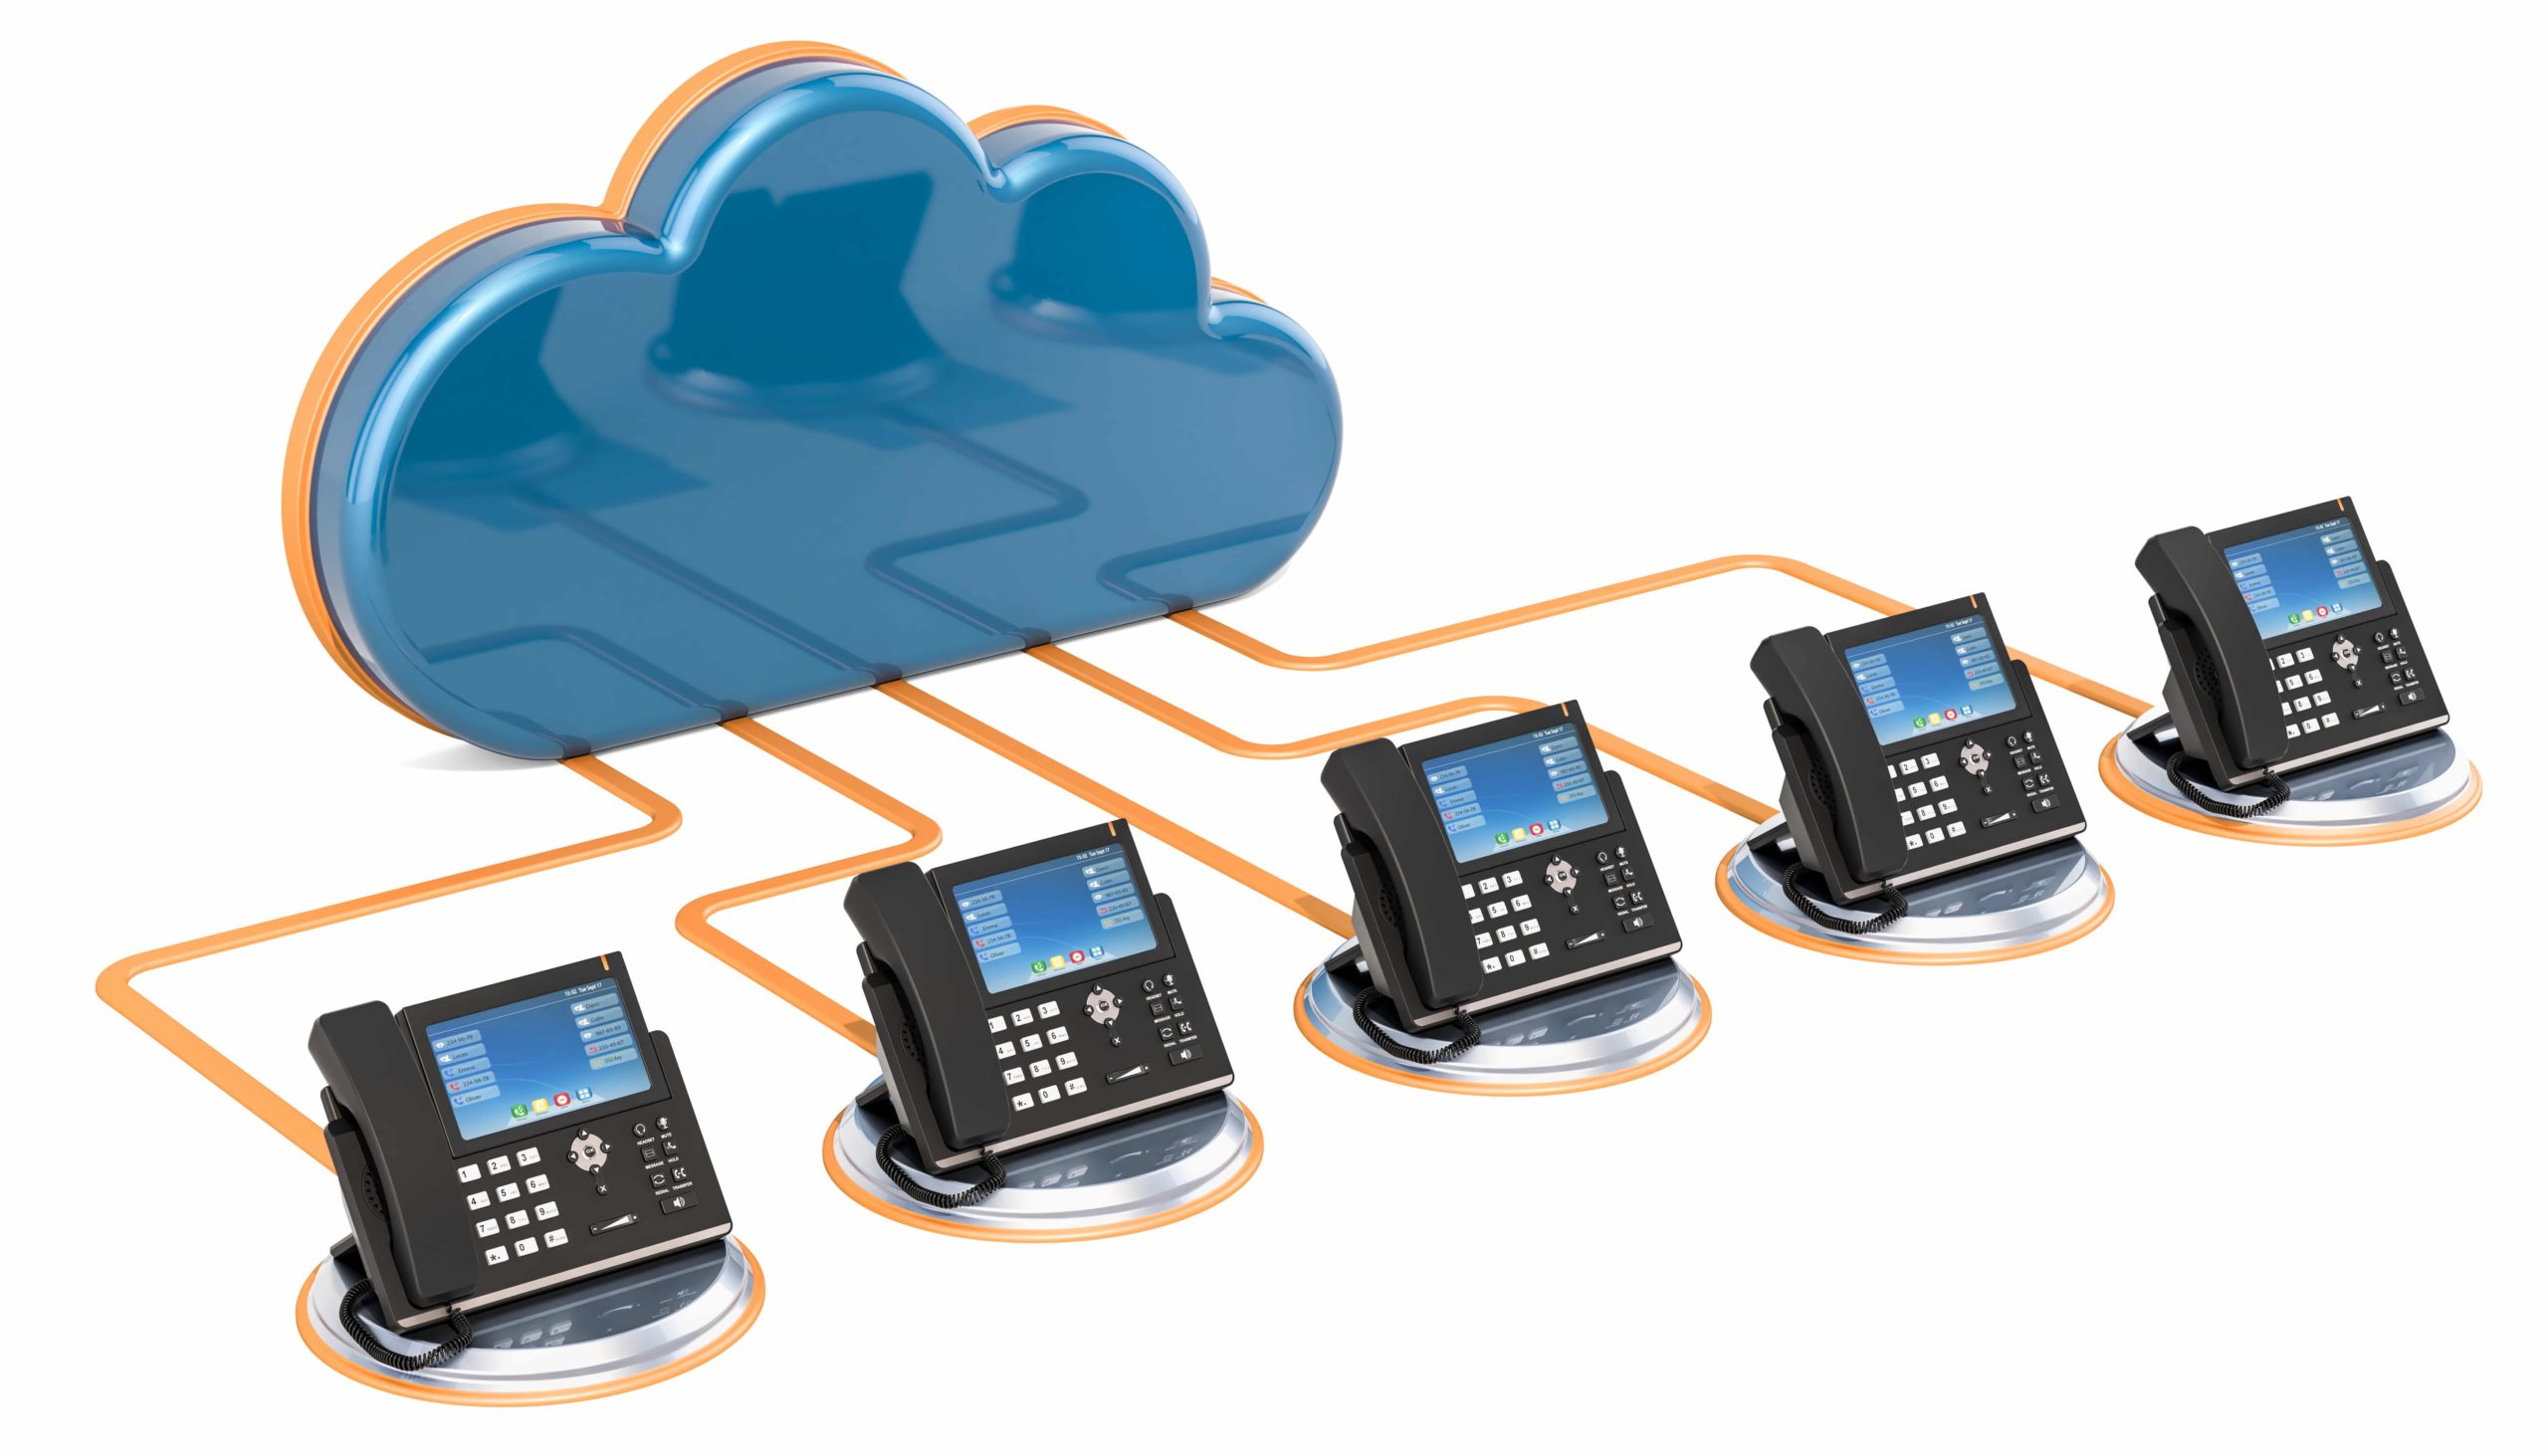 Pros and Cons of VoIP Every Business Should Know